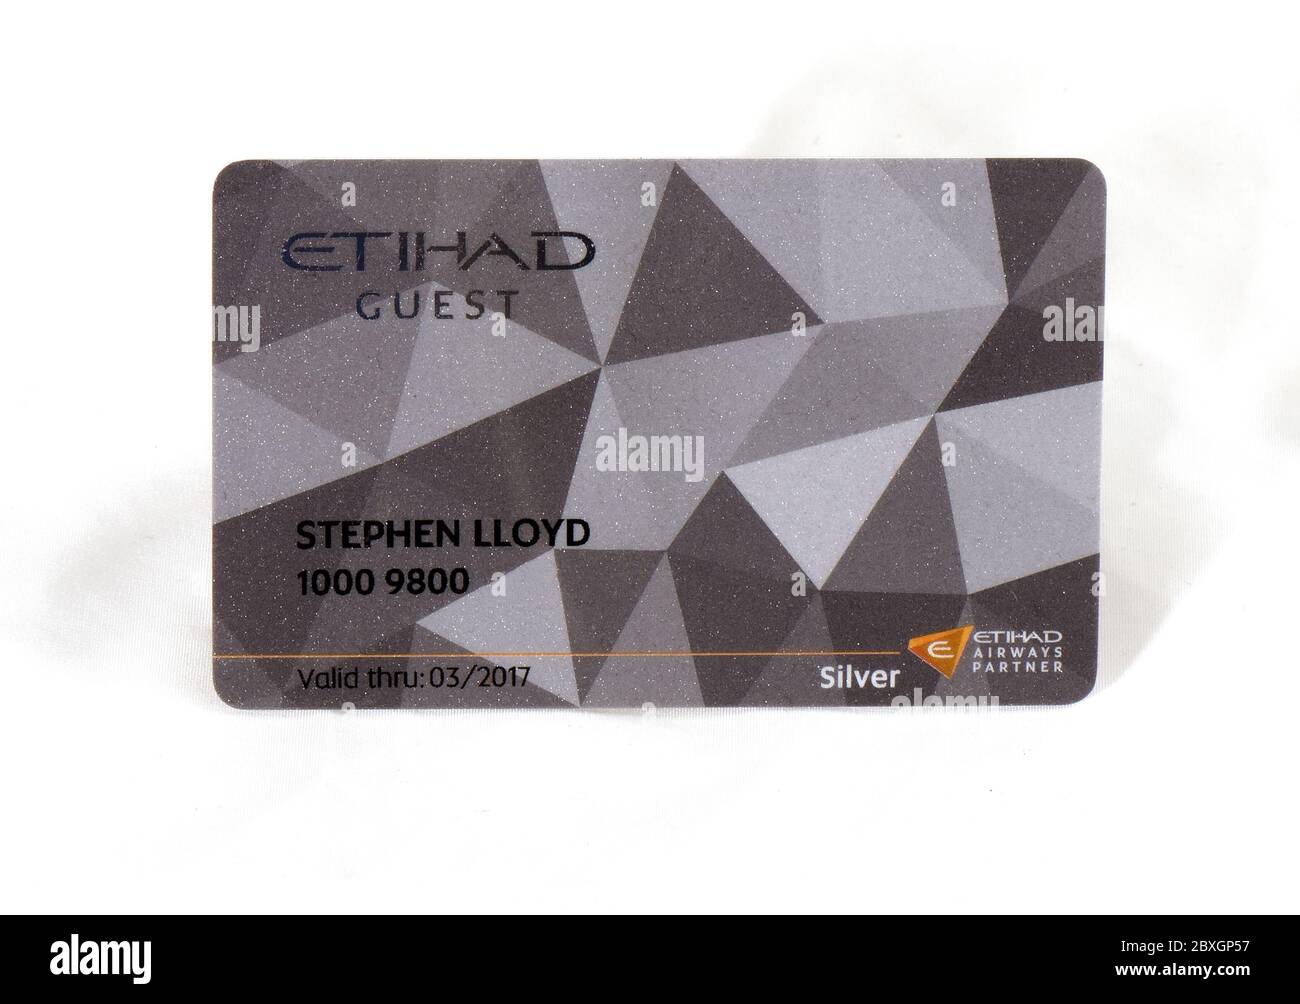 Silver frequent flyer card with Etihad airline. Stock Photo